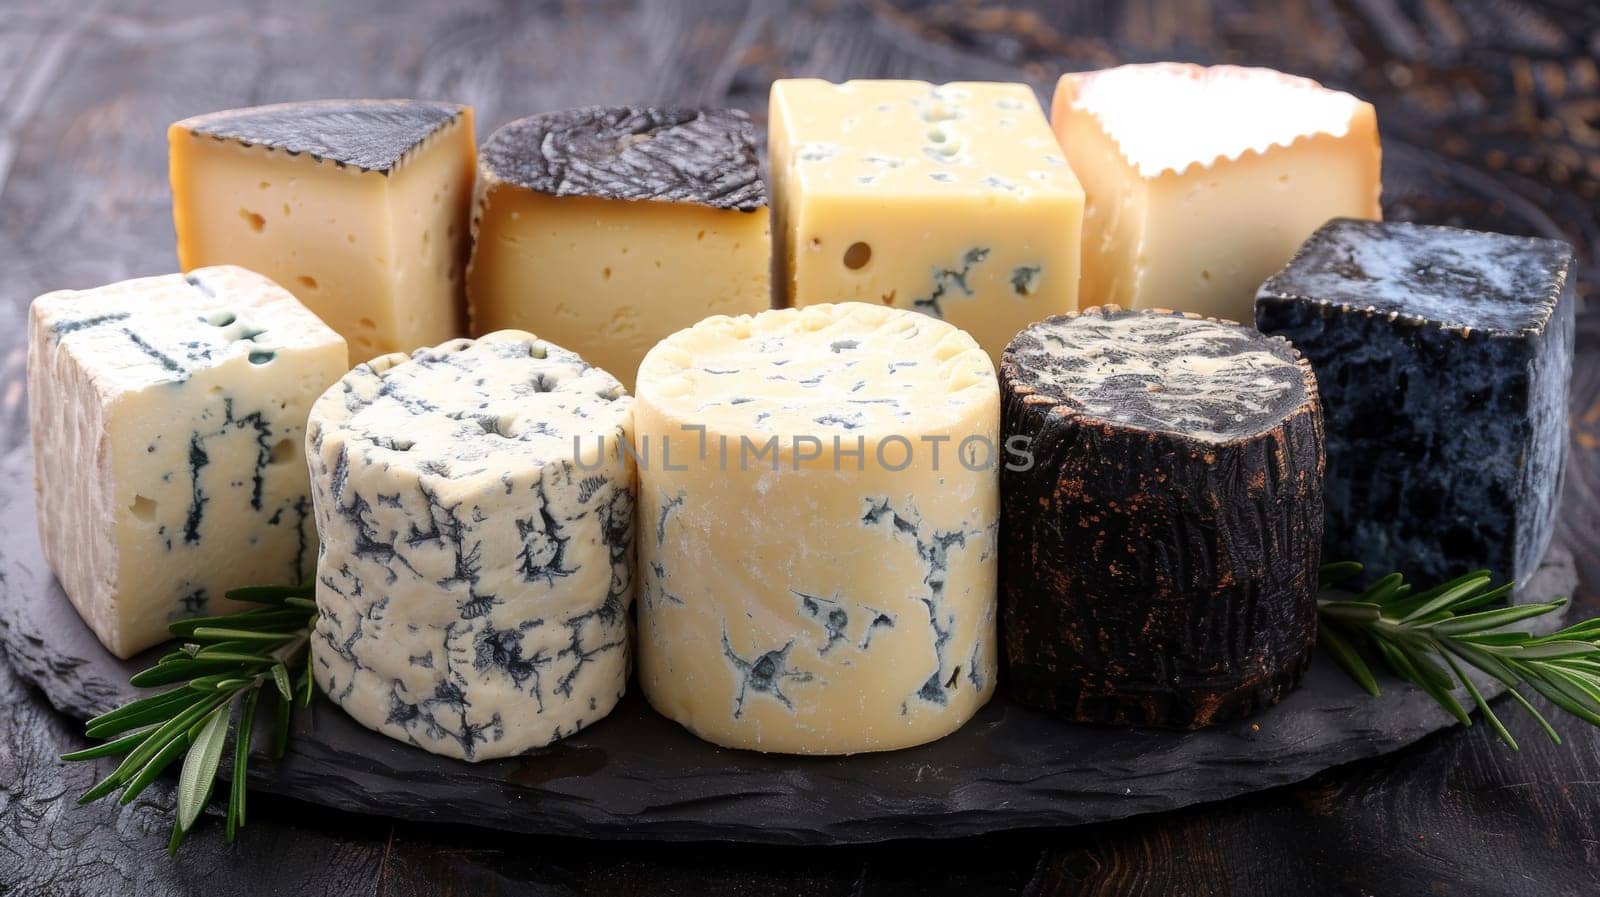 A group of different types and colors of cheese on a plate